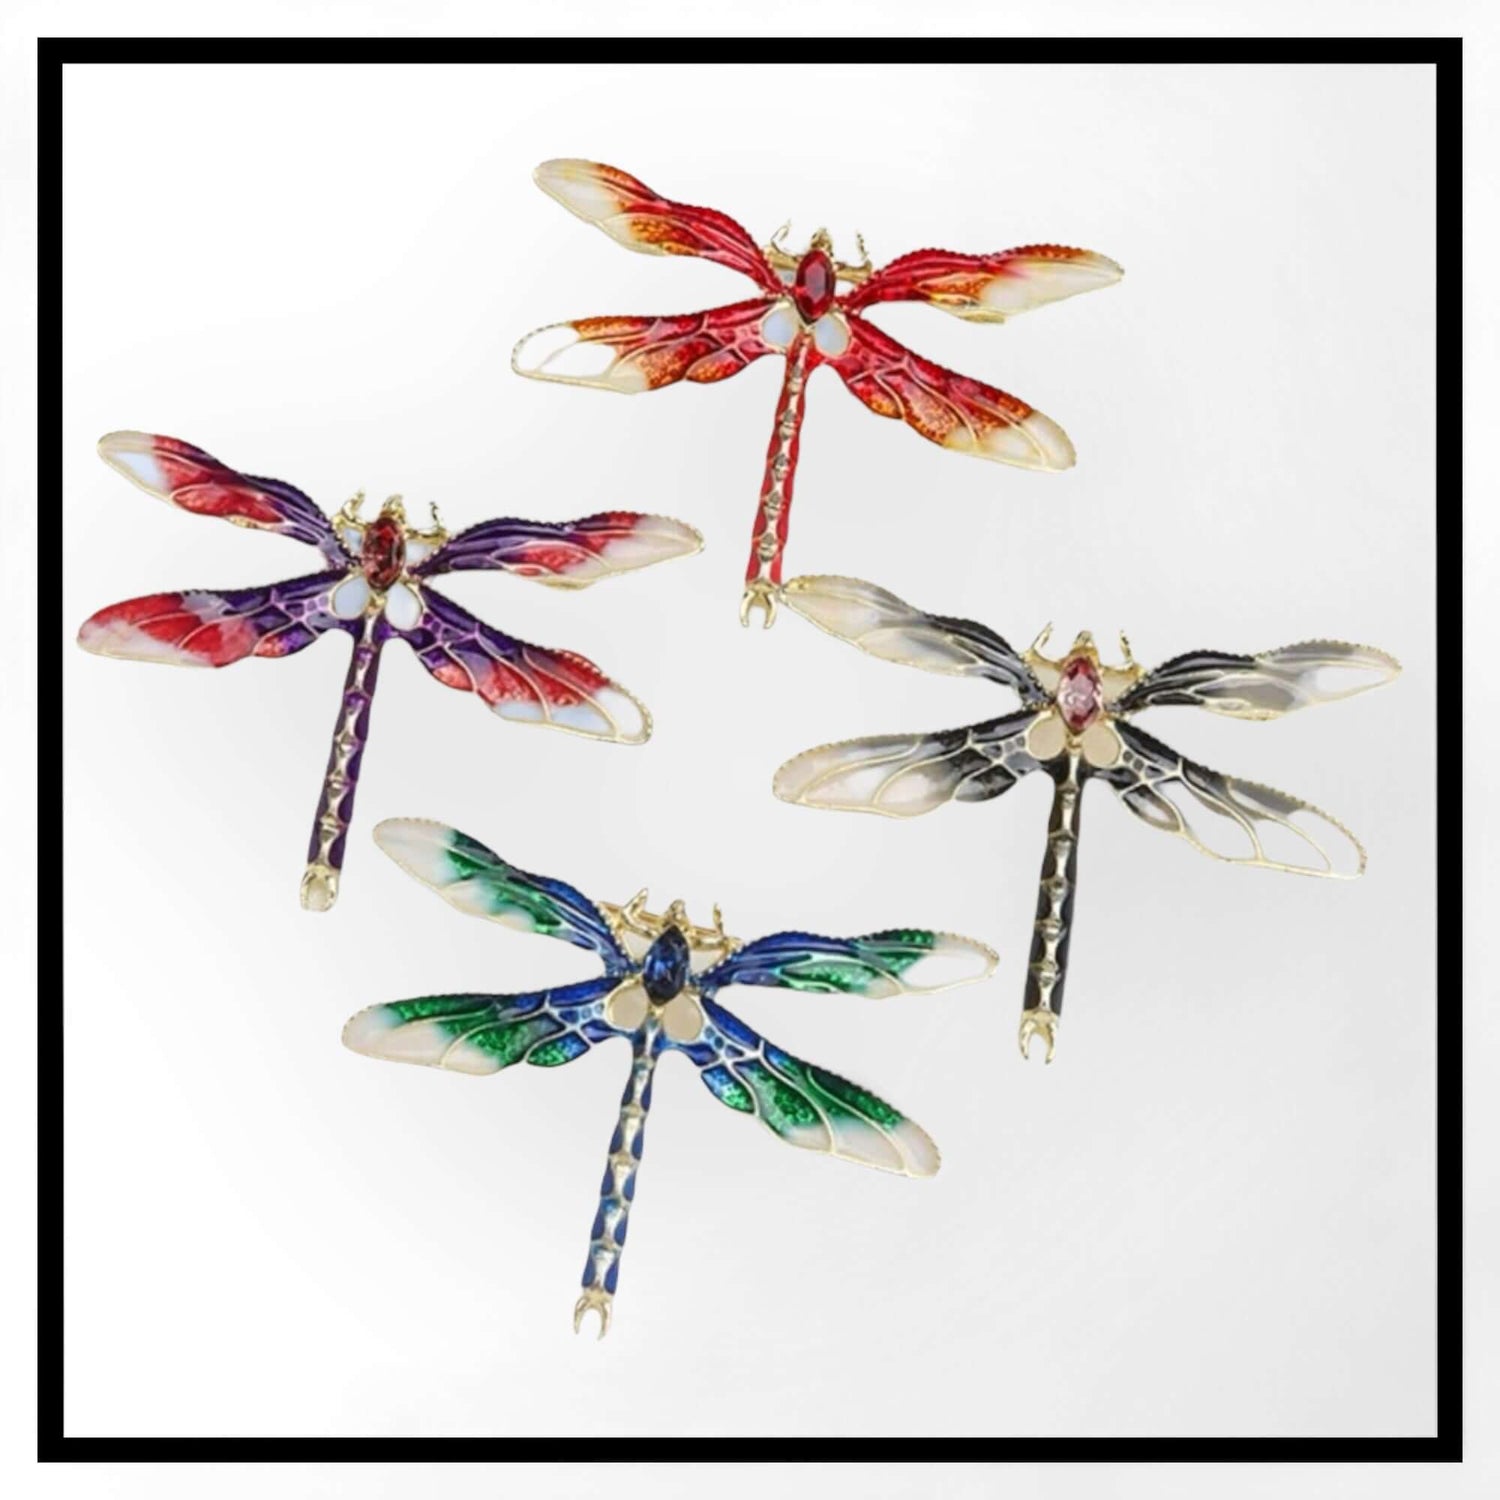 Cover image for our fashion jewellery collection featuring 3 dragonfly brooches in blue, red and purple available from Twekve Silver Trees jewellery 